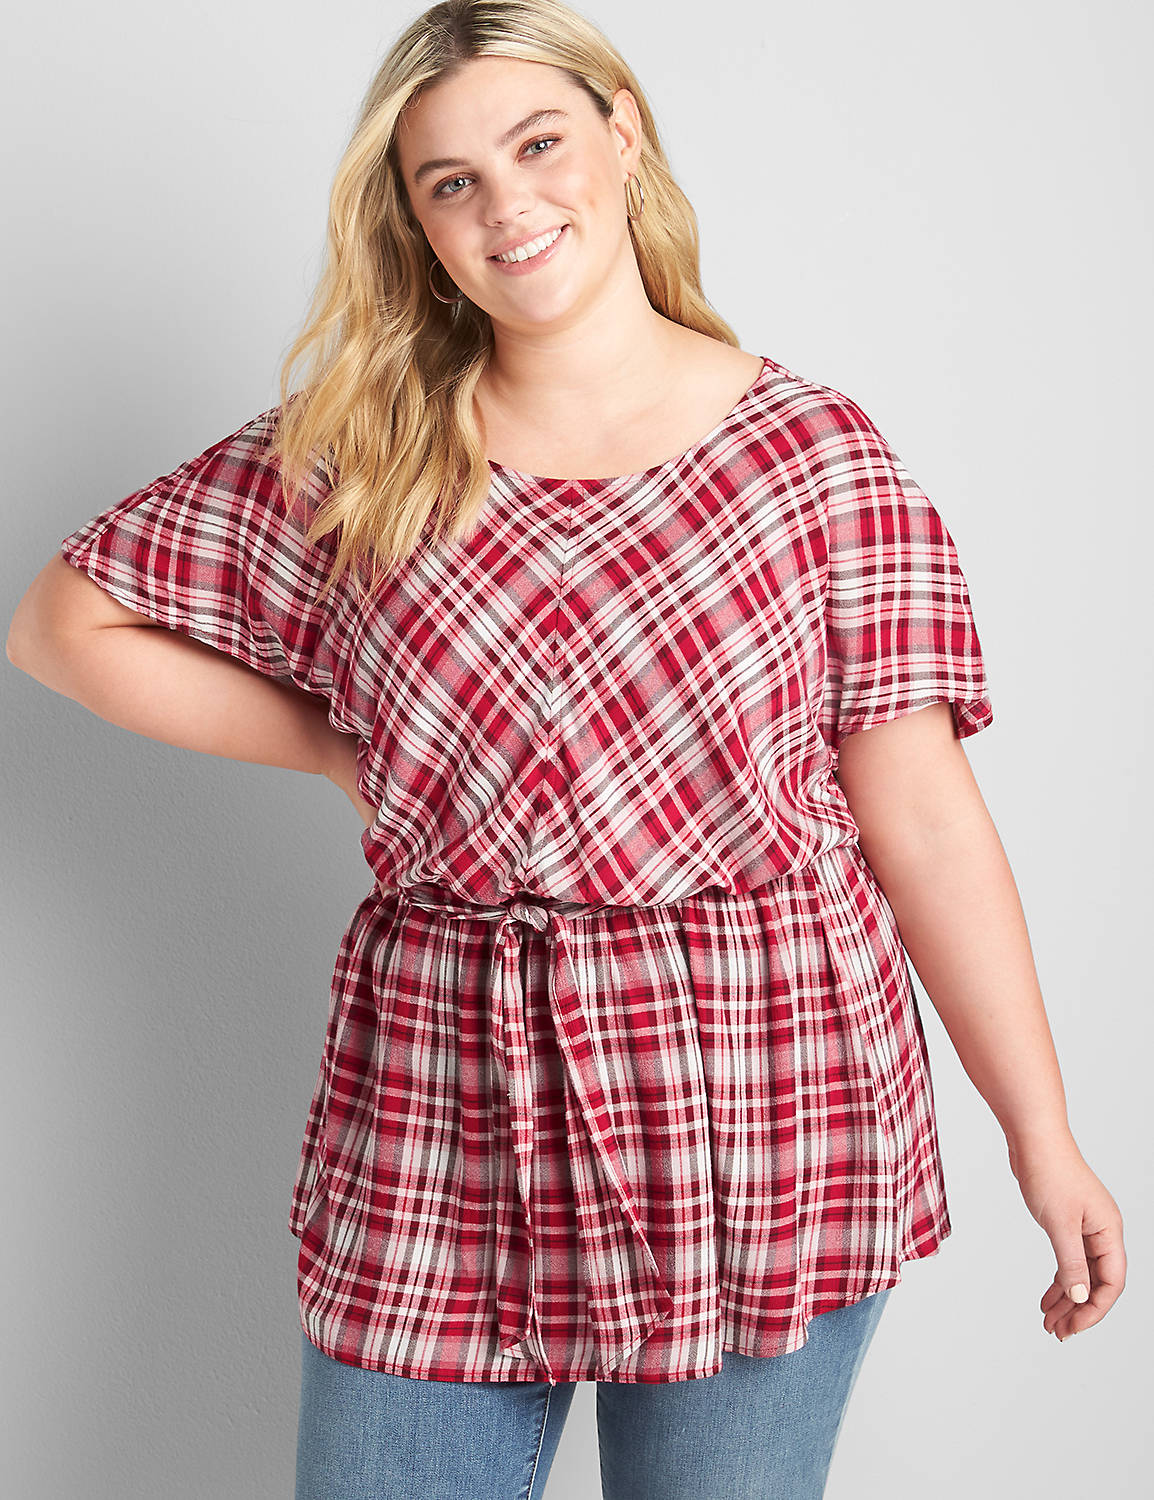 Short-Sleeve Belted Plaid Top Product Image 1